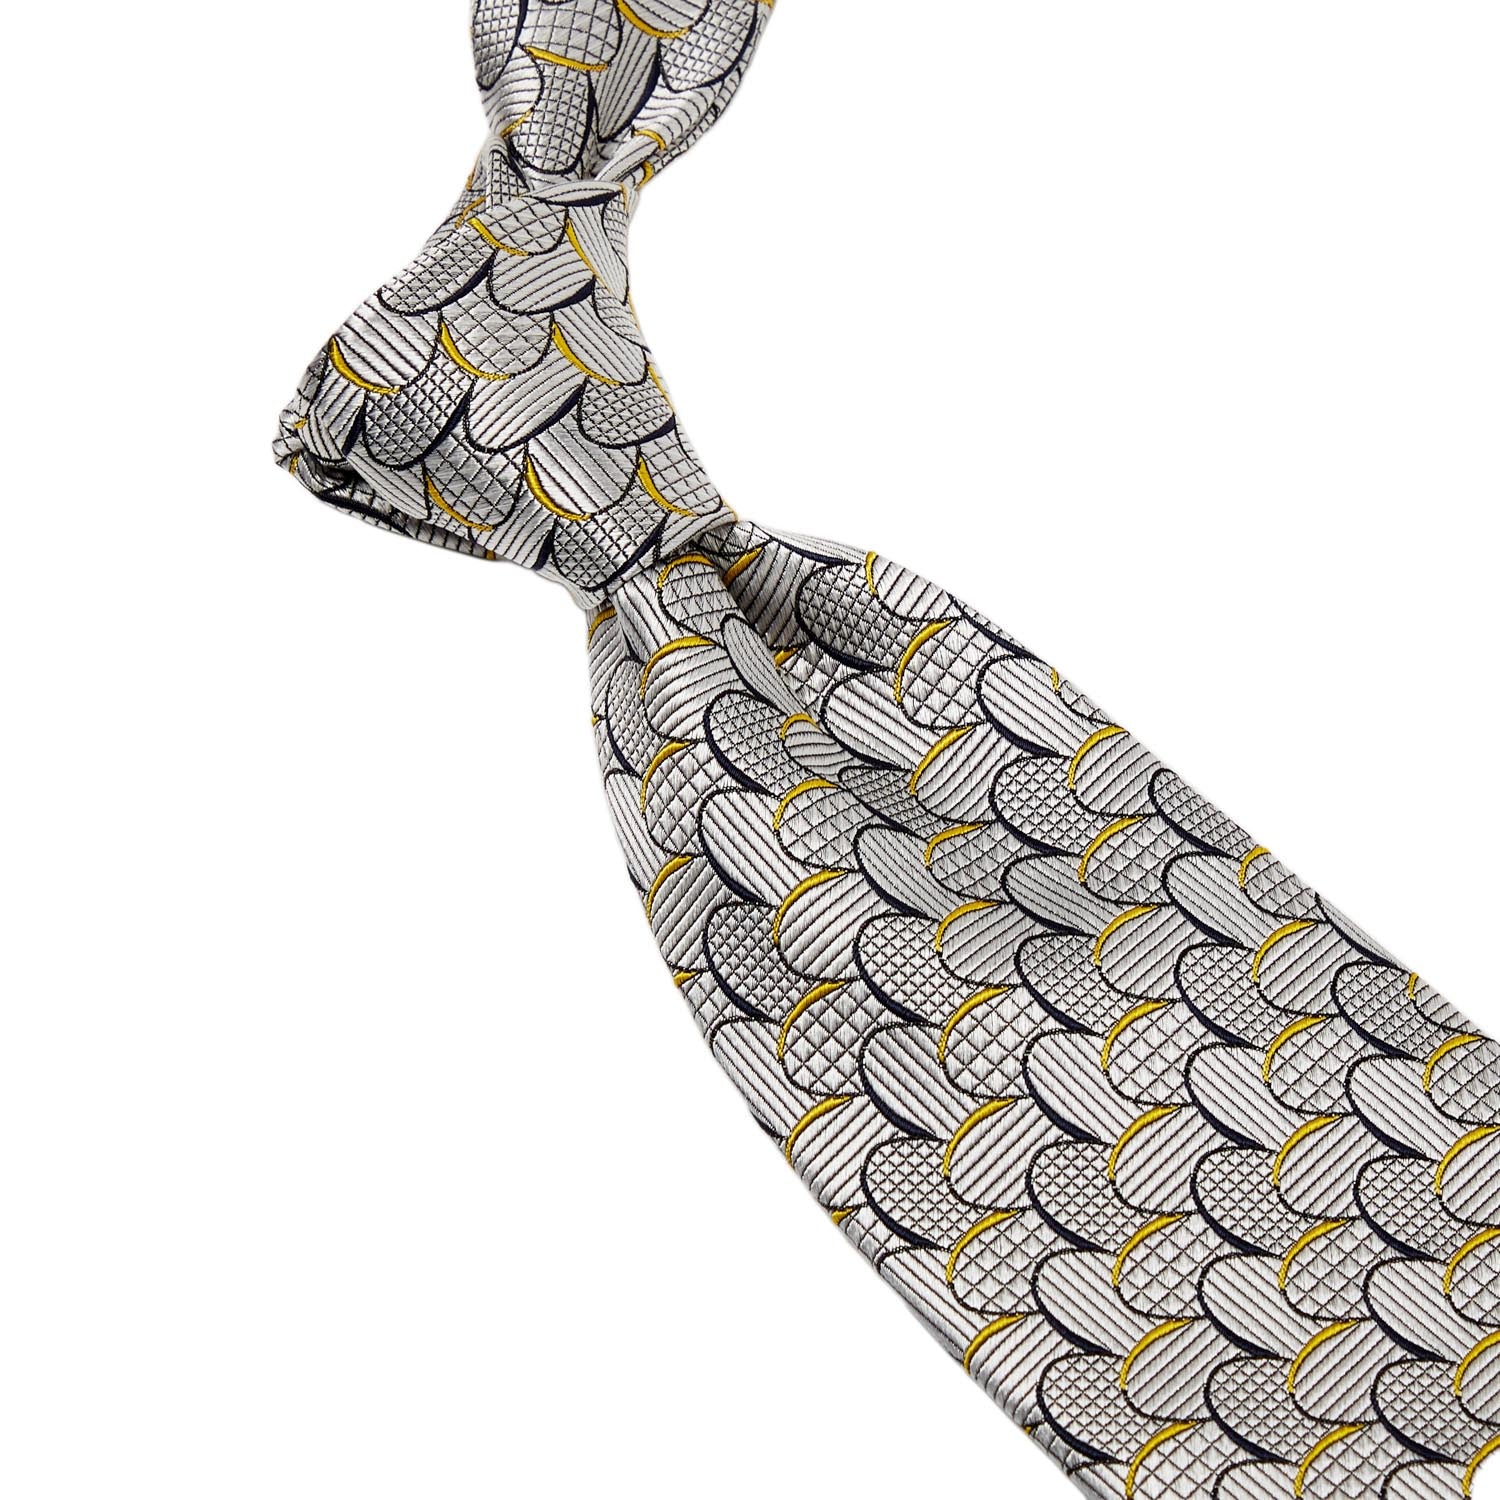 A handmade Sovereign Grade Sydney Jacquard Tie (150x8.5 cm) with a yellow and grey pattern, ideal for KirbyAllison.com ties.